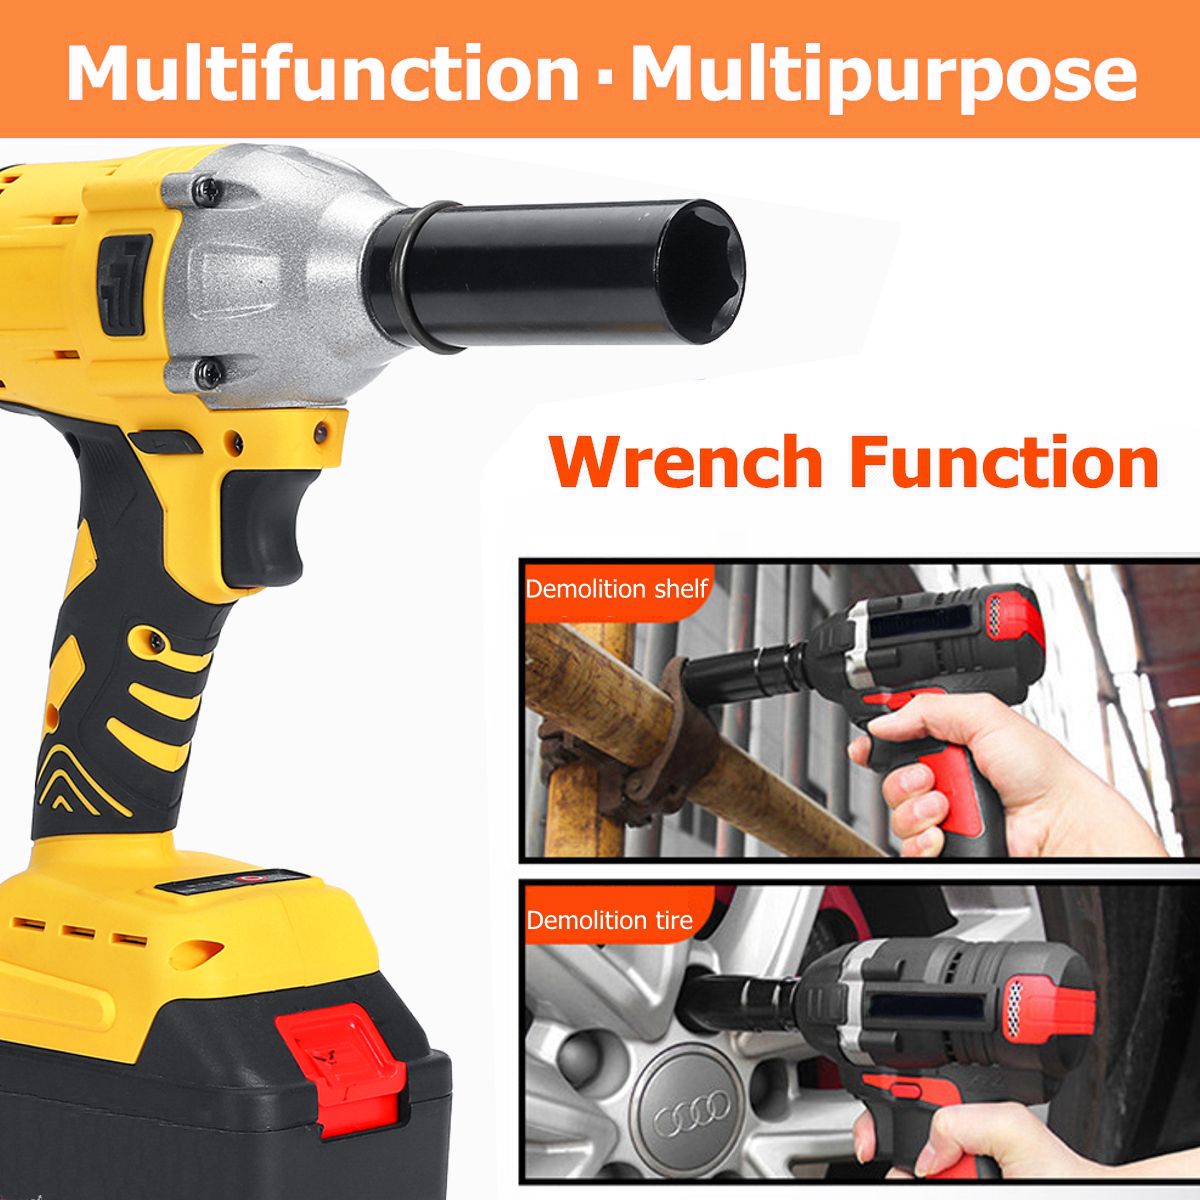 108VF-Electric-Cordless-Drill-Brushless-Impact-Wrench-Torque-Tool-30000mAh-LED-Lights-1614718